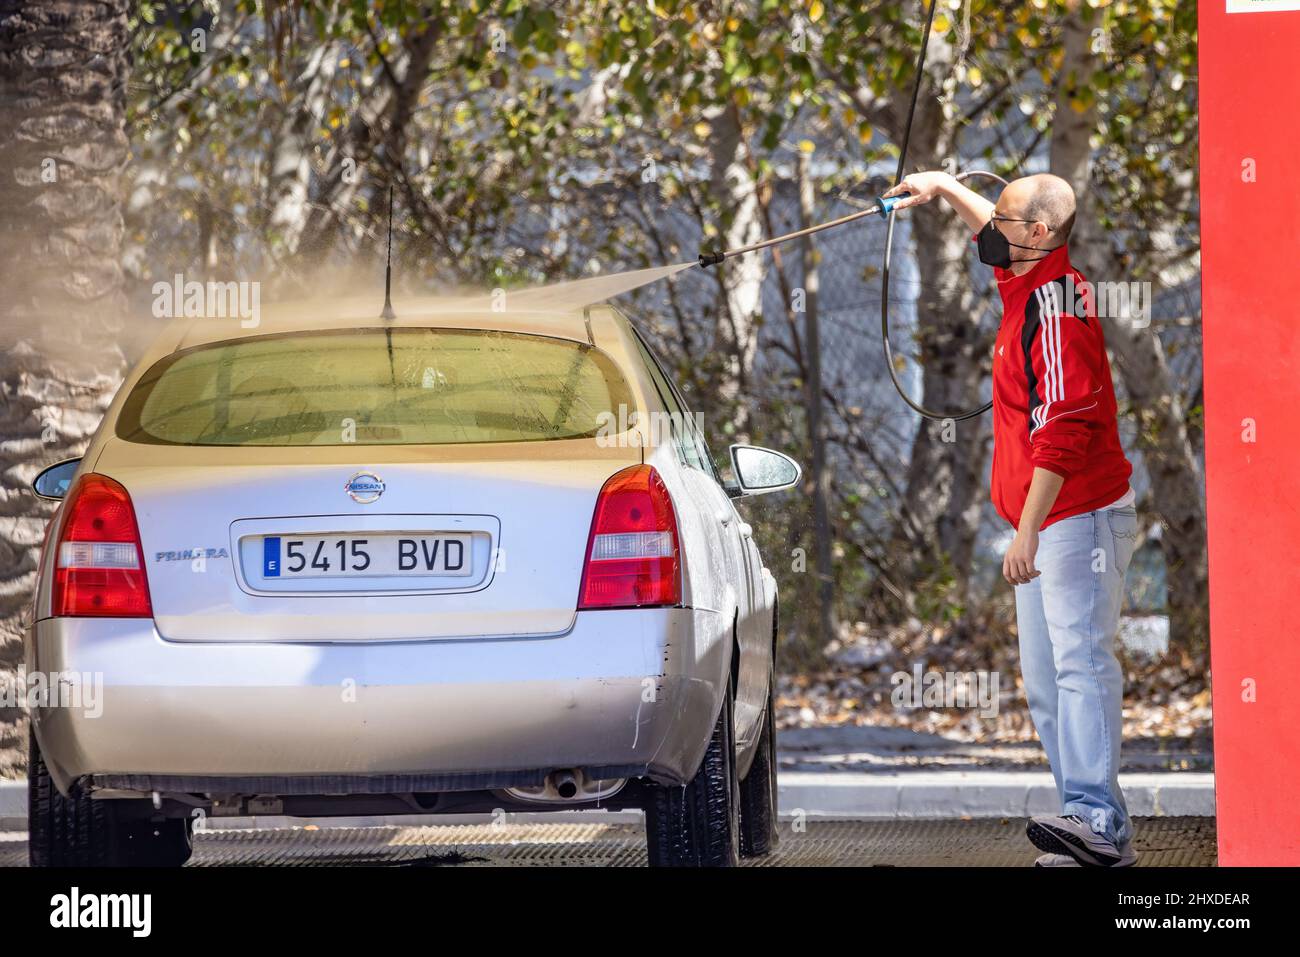 Huelva, Spain - March 9, 2022: An unidentified man is cleaning his car using a high pressure water at service station Stock Photo